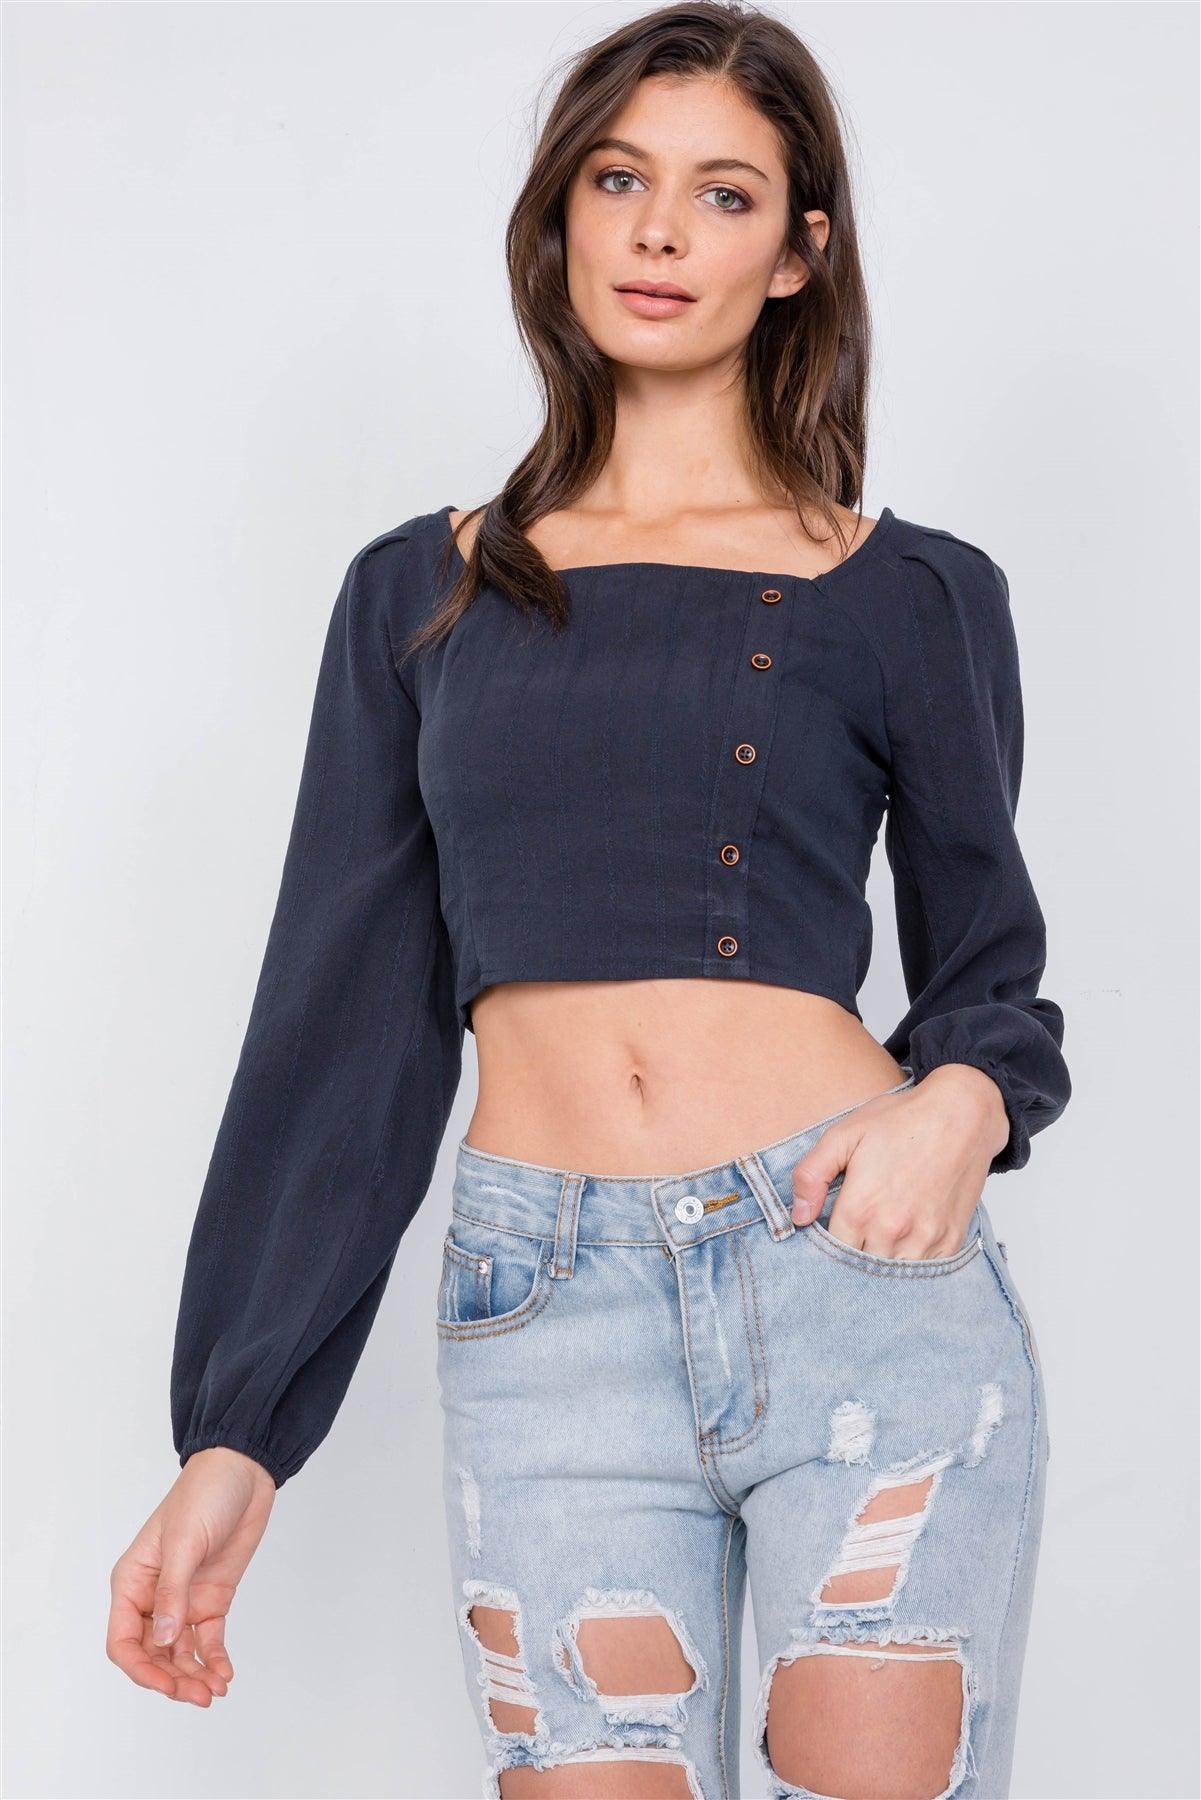 Navy Side Button Square Neck Chic Crop Top /2-2-2